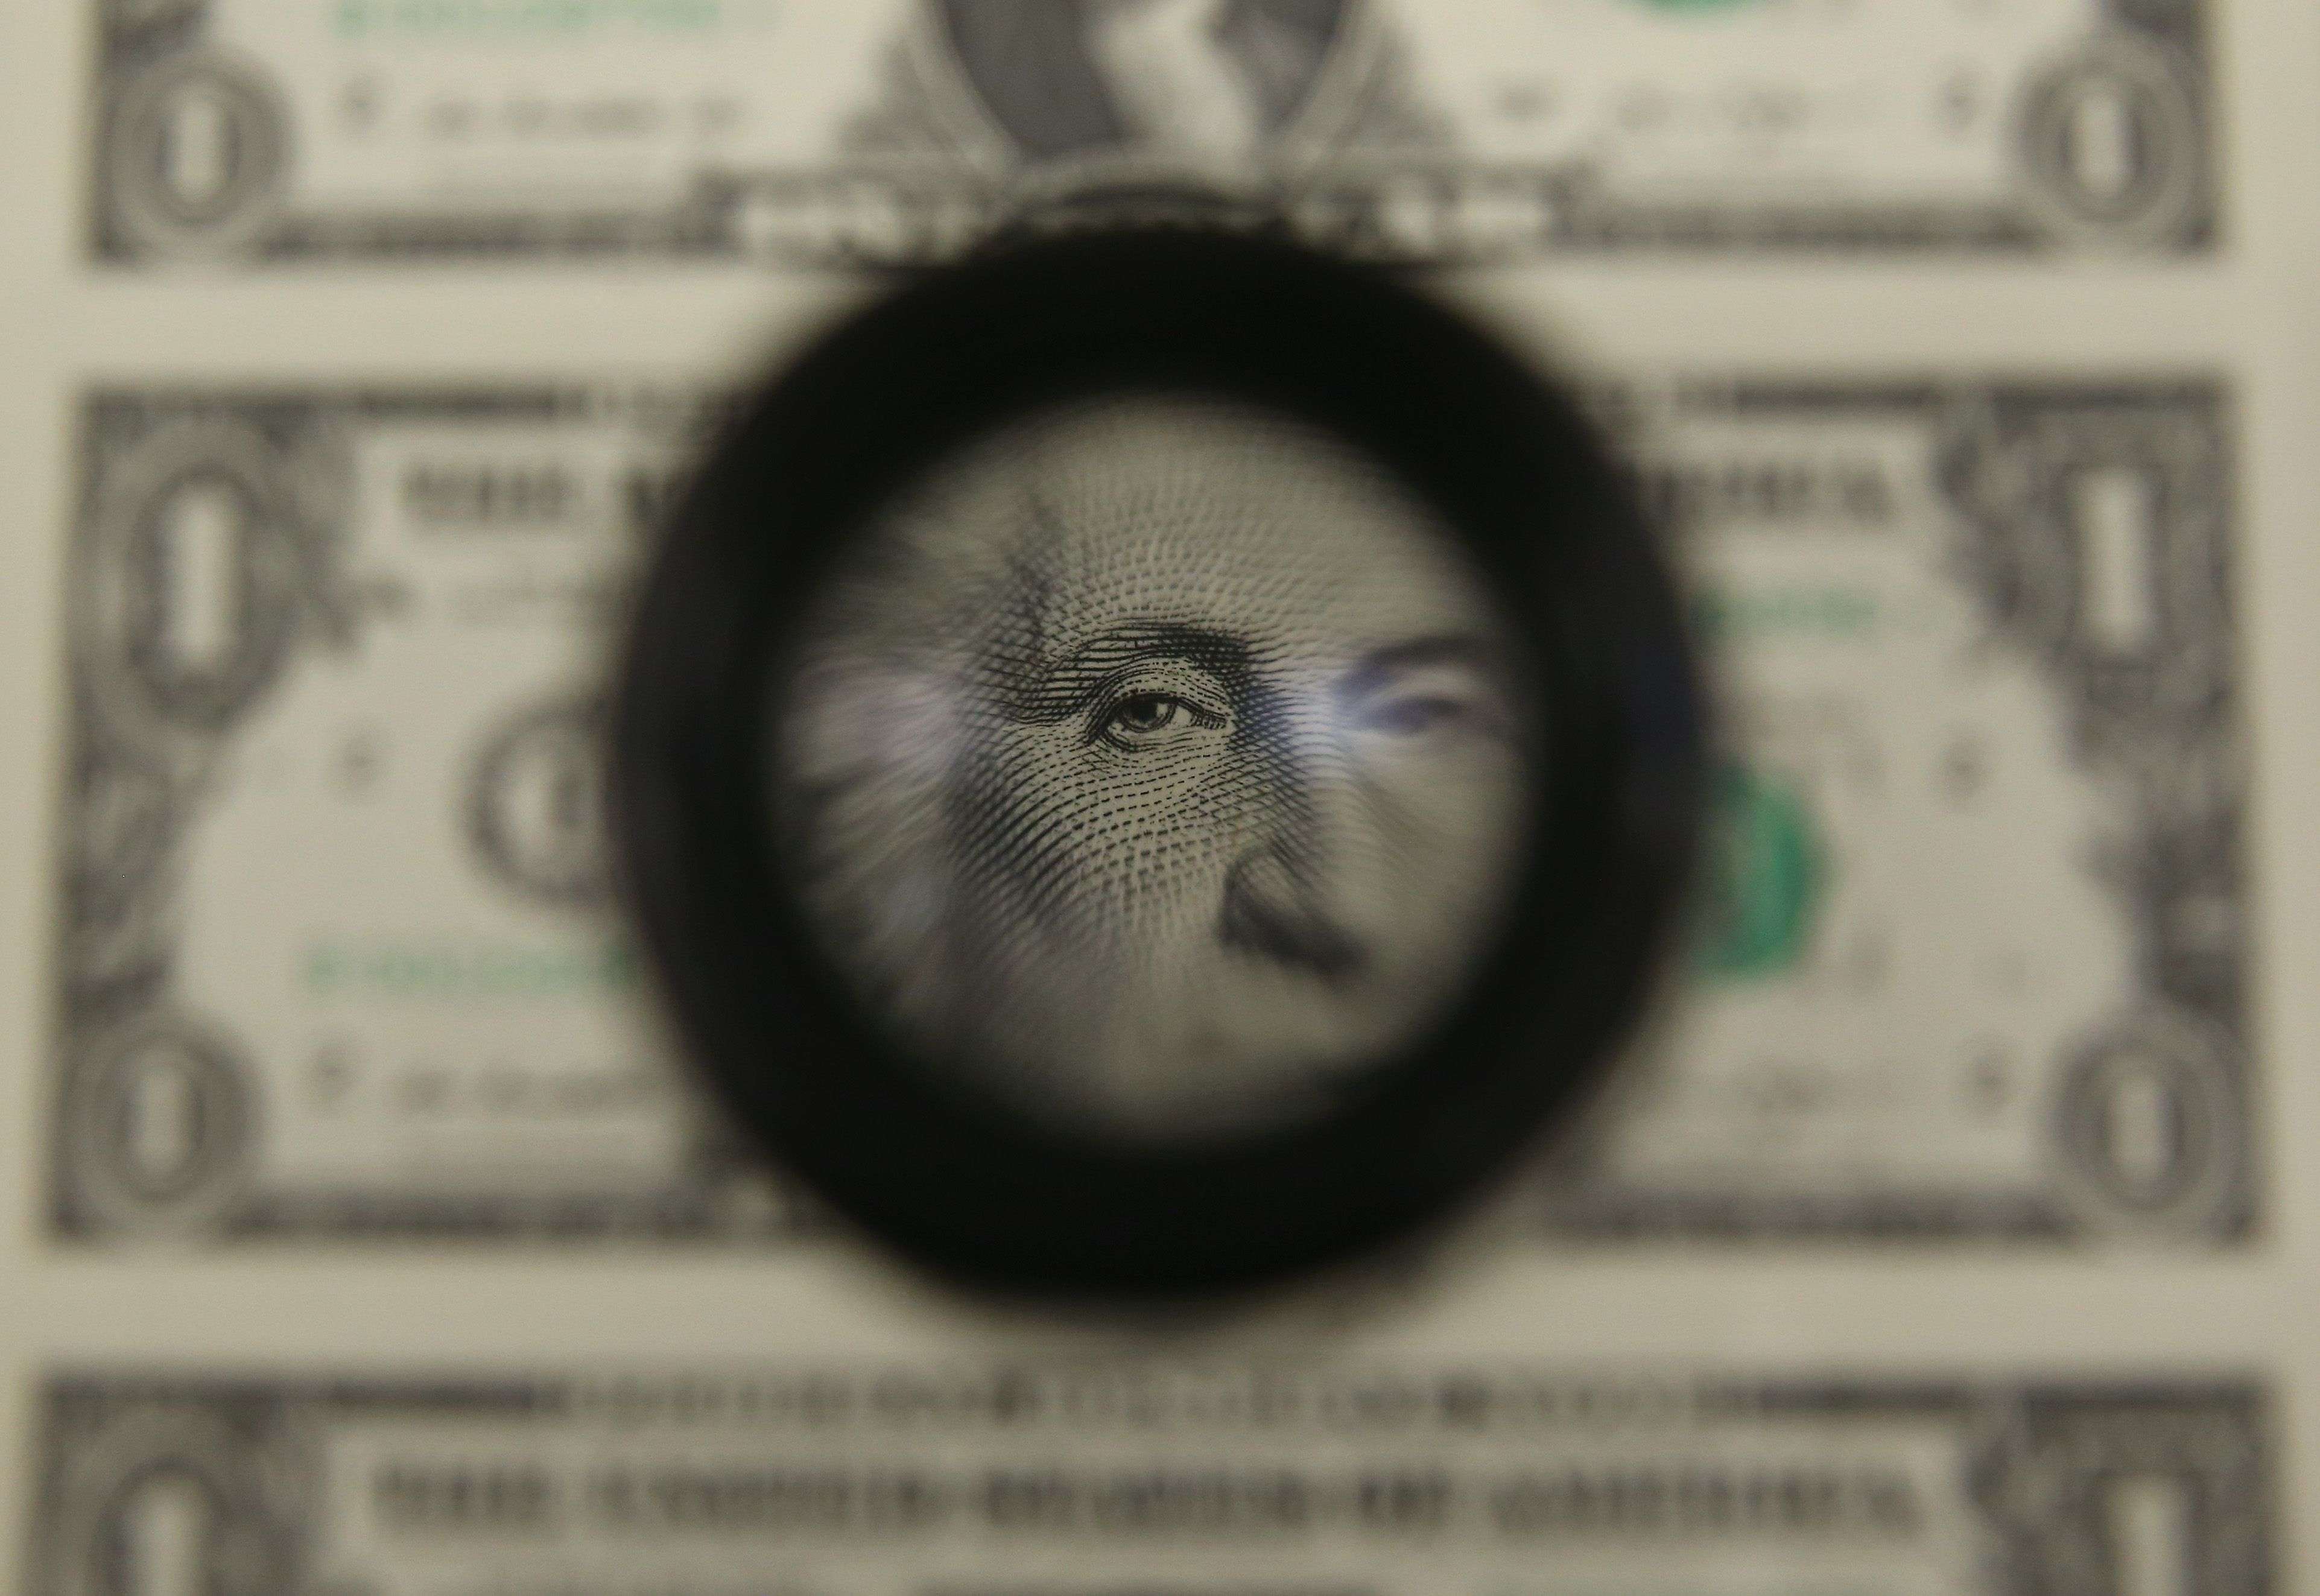 A magnifying glass is used to inspect newly printed one dollar bills at the Bureau of Engraving and Printing in March 2015 in Washington, DC. Photo: Getty Images.